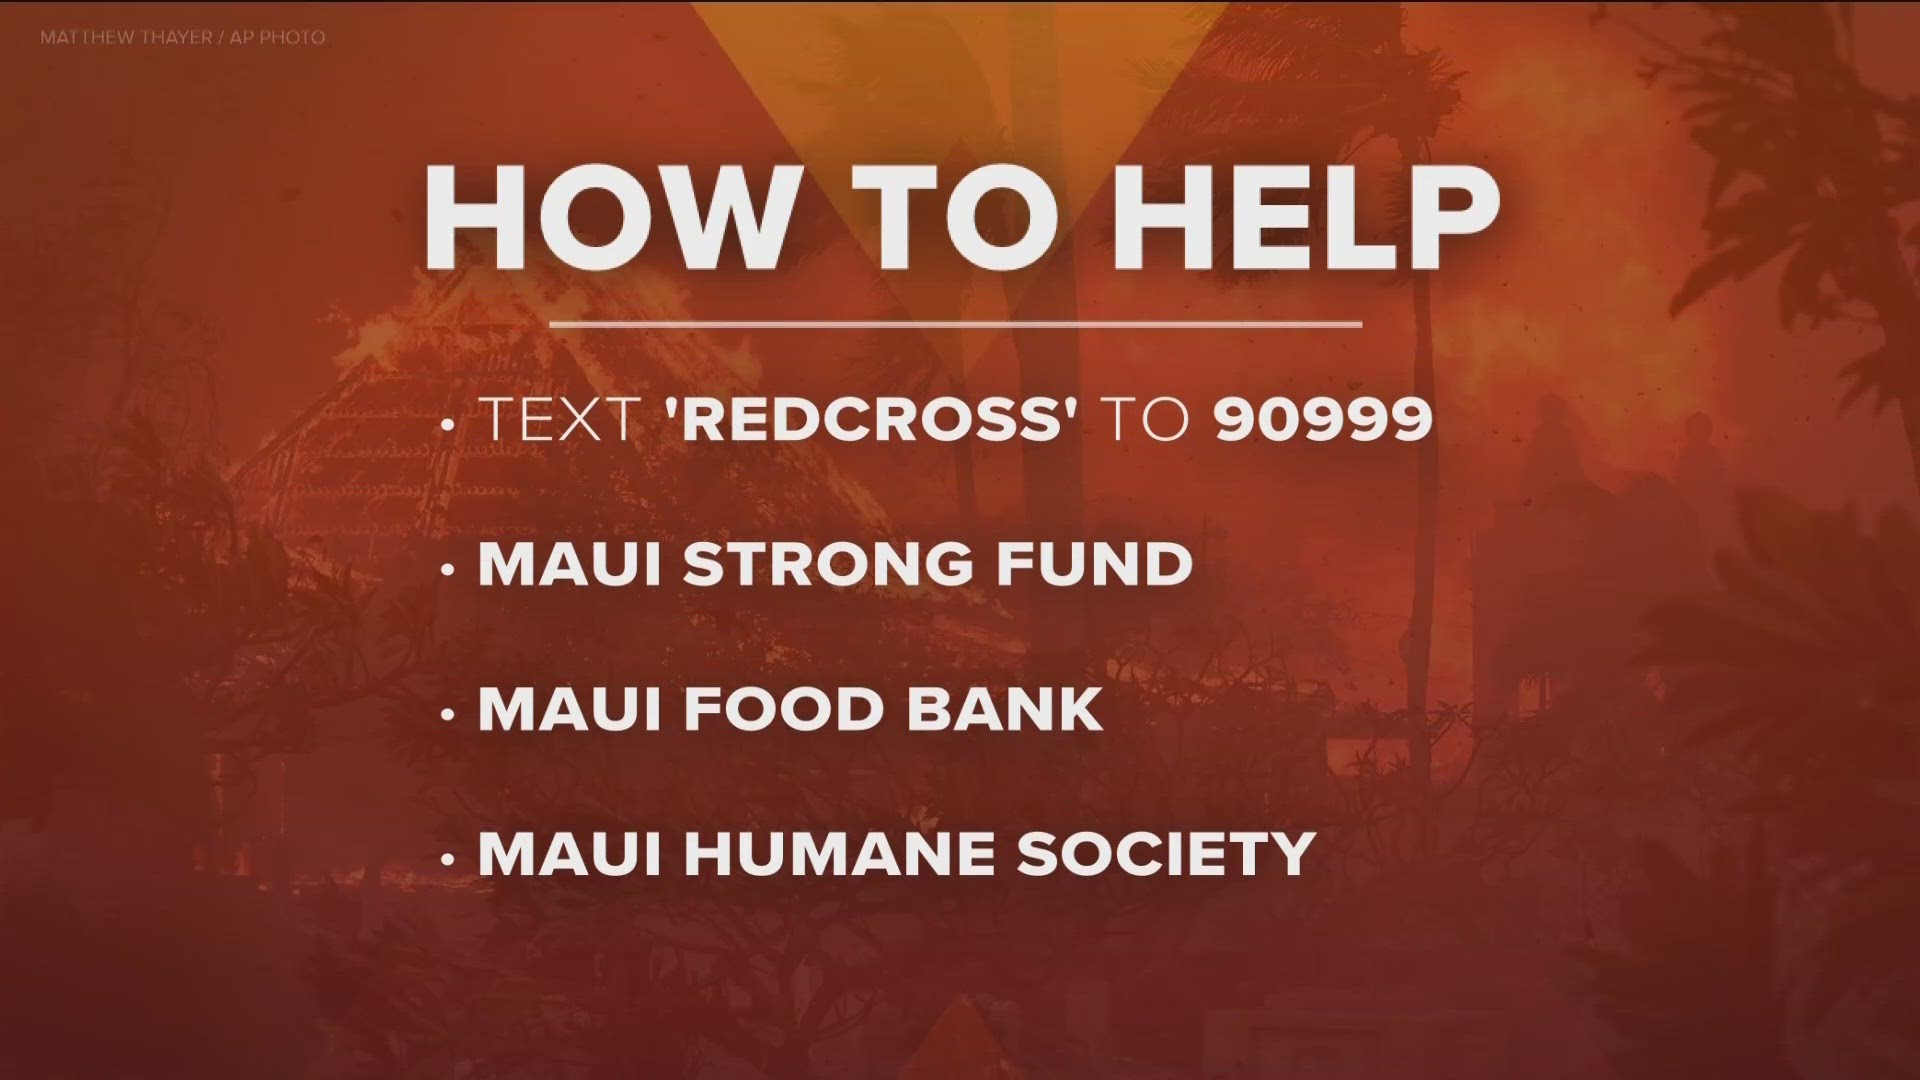 With so many connections between San Diego and Maui, businesses and groups here are raising and donating money for those in need.